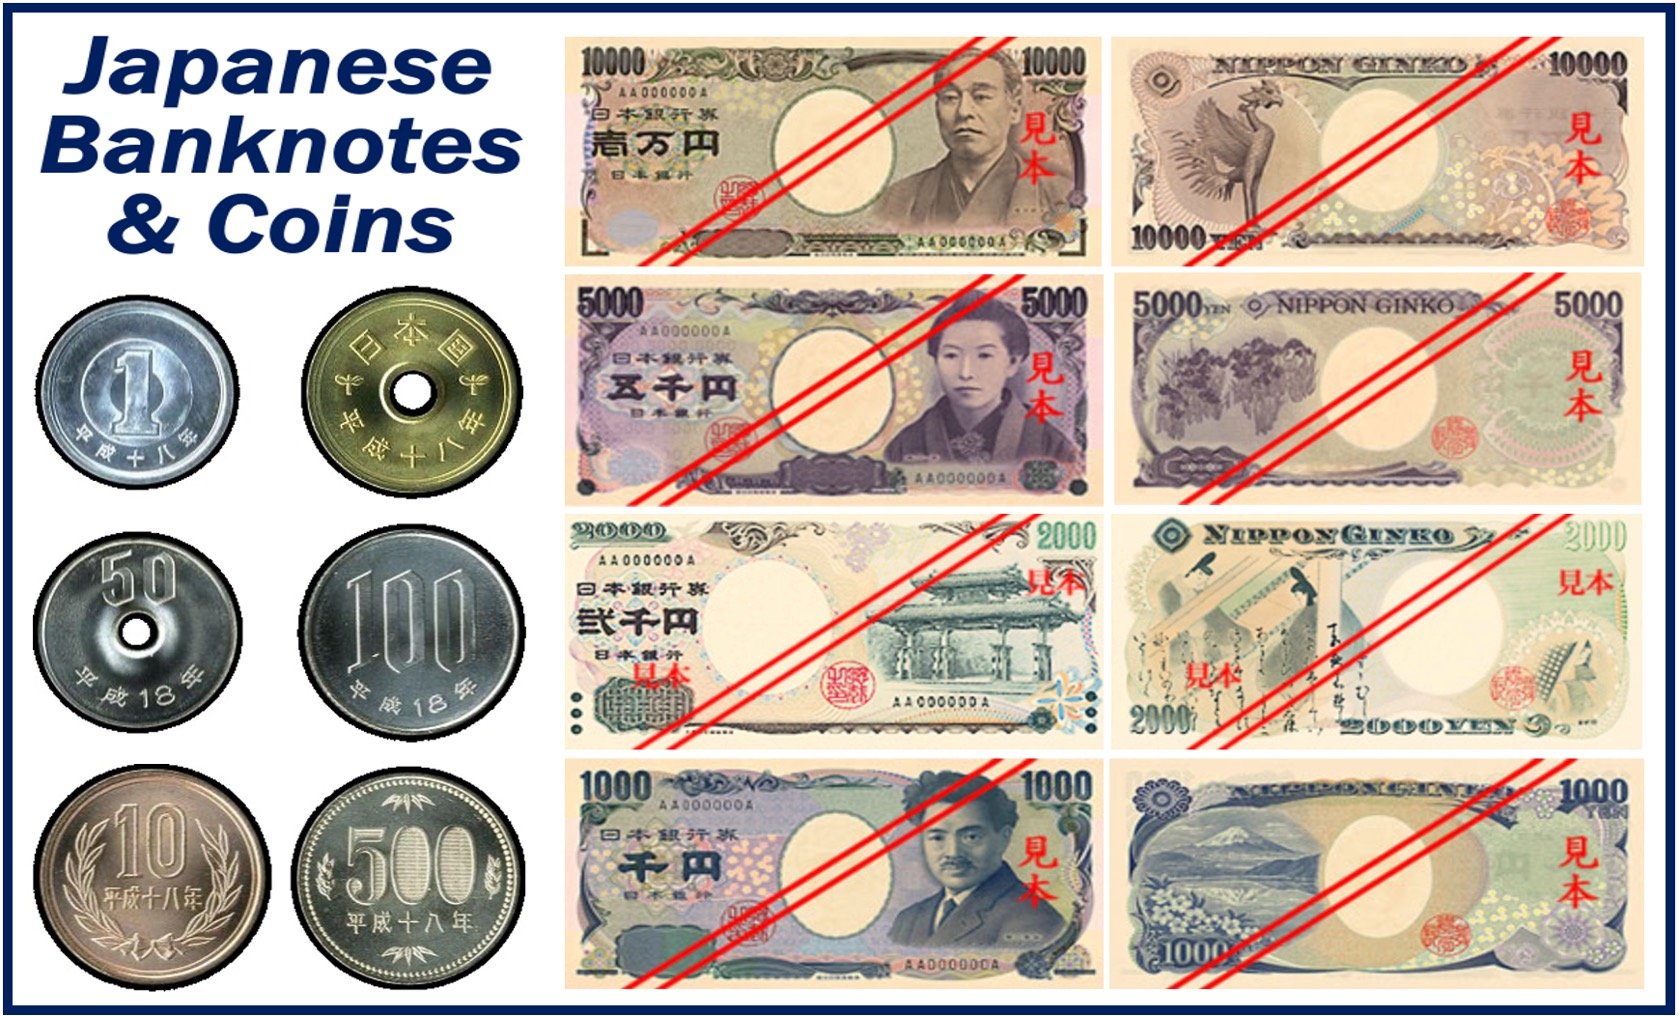 Japanese banknotes and coins - denominations